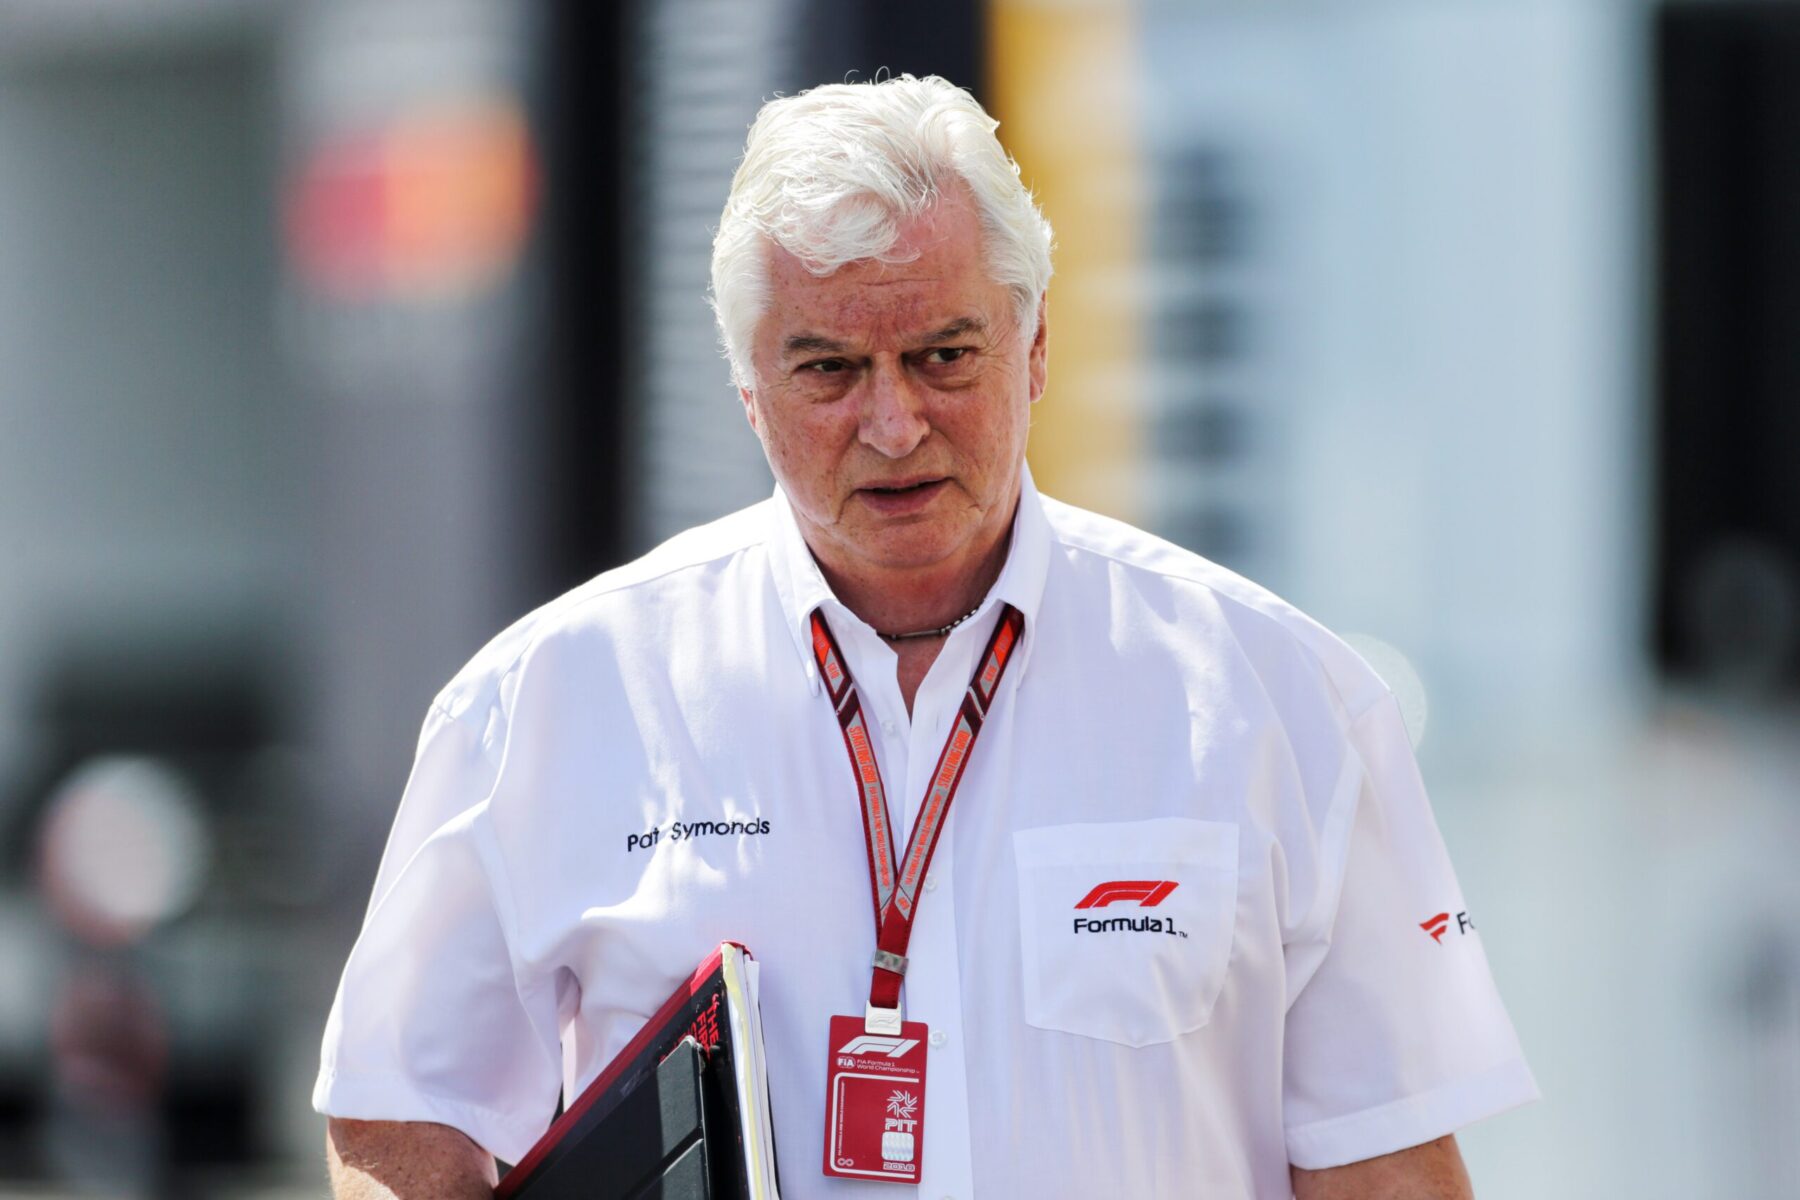 Symonds to vacate position as F1’s Chief Technical Officer